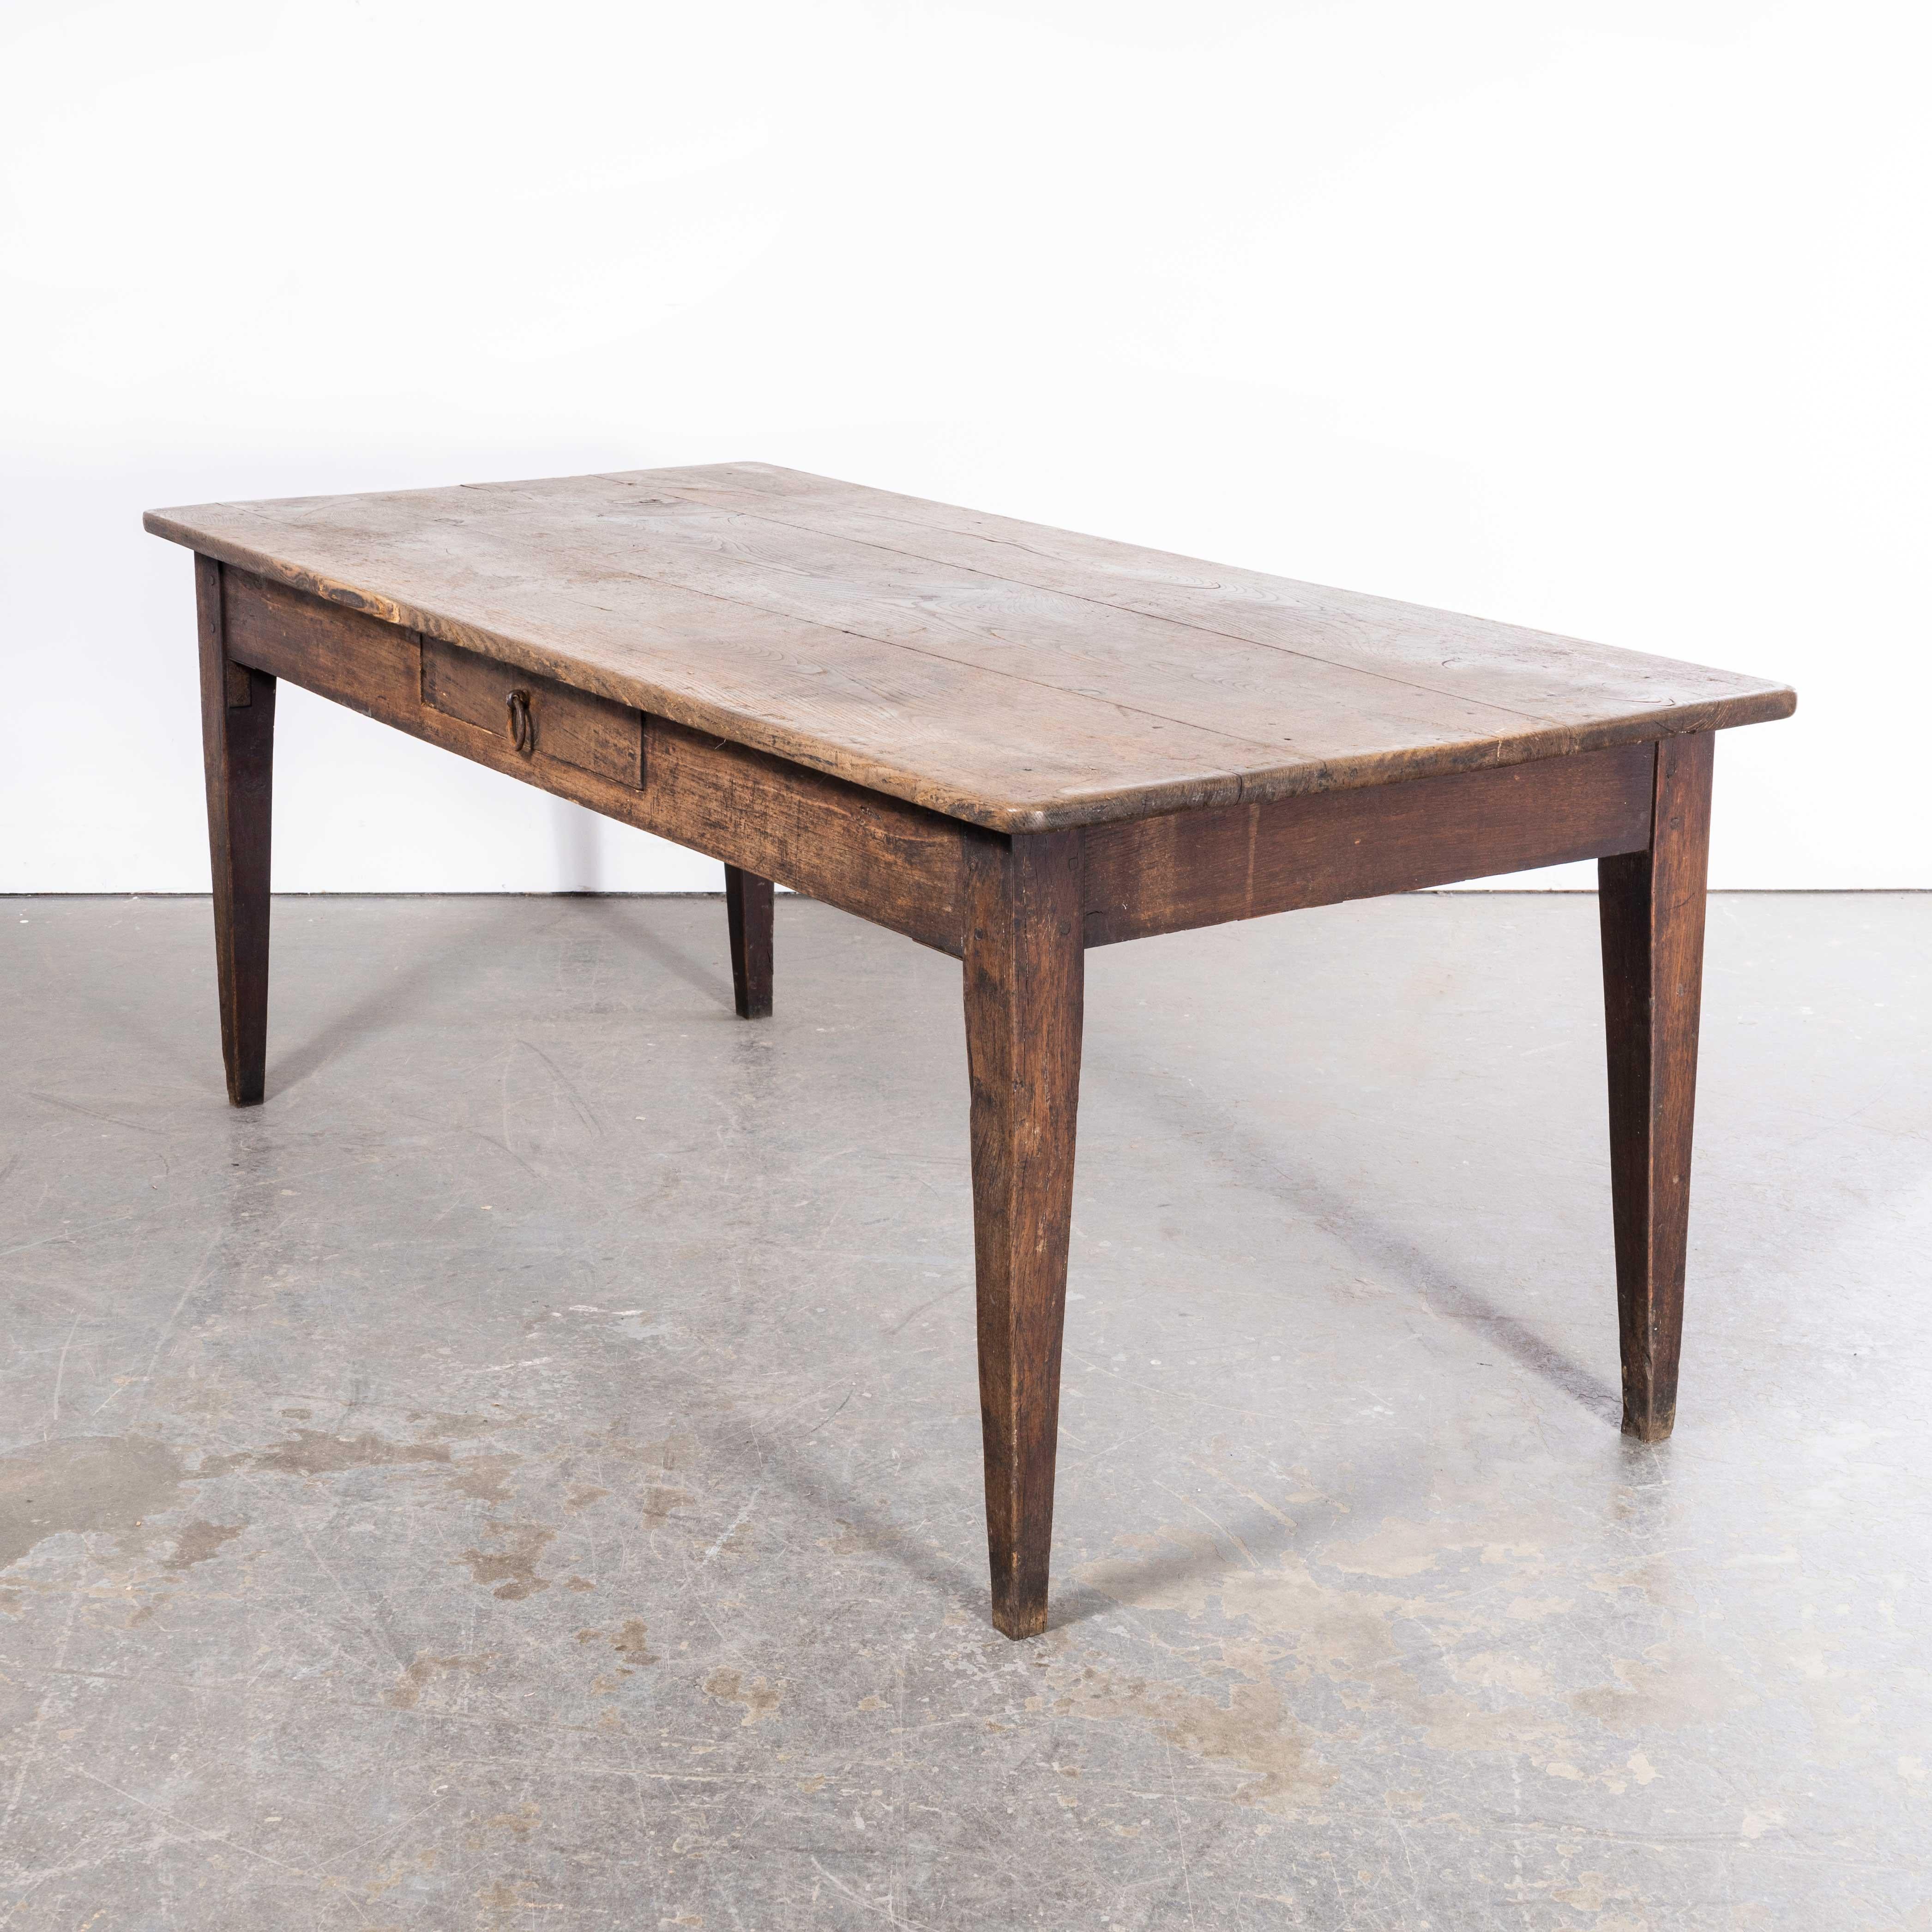 19th Century French Oak Rectangular Farmhouse Dining Table – Three Plank
19th Century French Oak Rectangular Farmhouse Dining Table – Three Plank. Good original French classic farmhouse table made from solid oak throughout. The table has a single